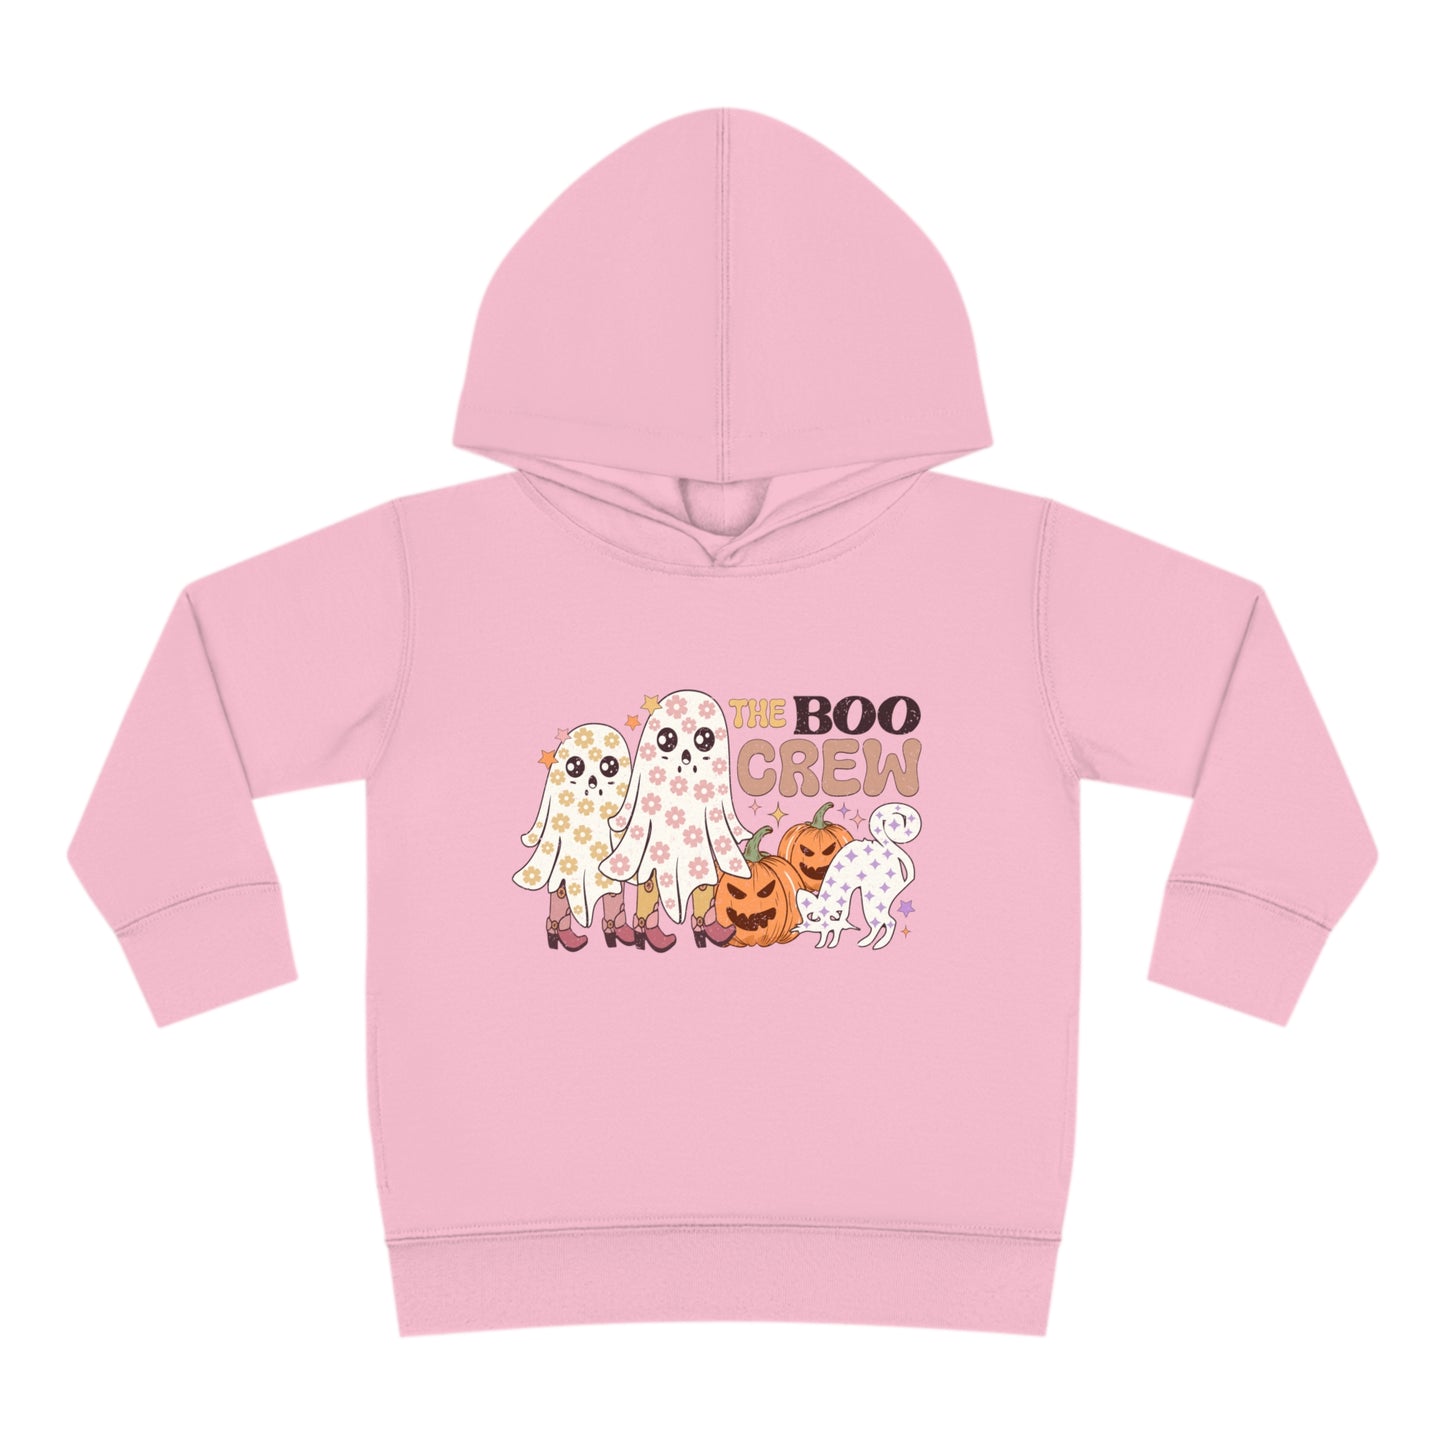 Style 5 The Boo Crew Toddler Pullover Fleece Hoodie